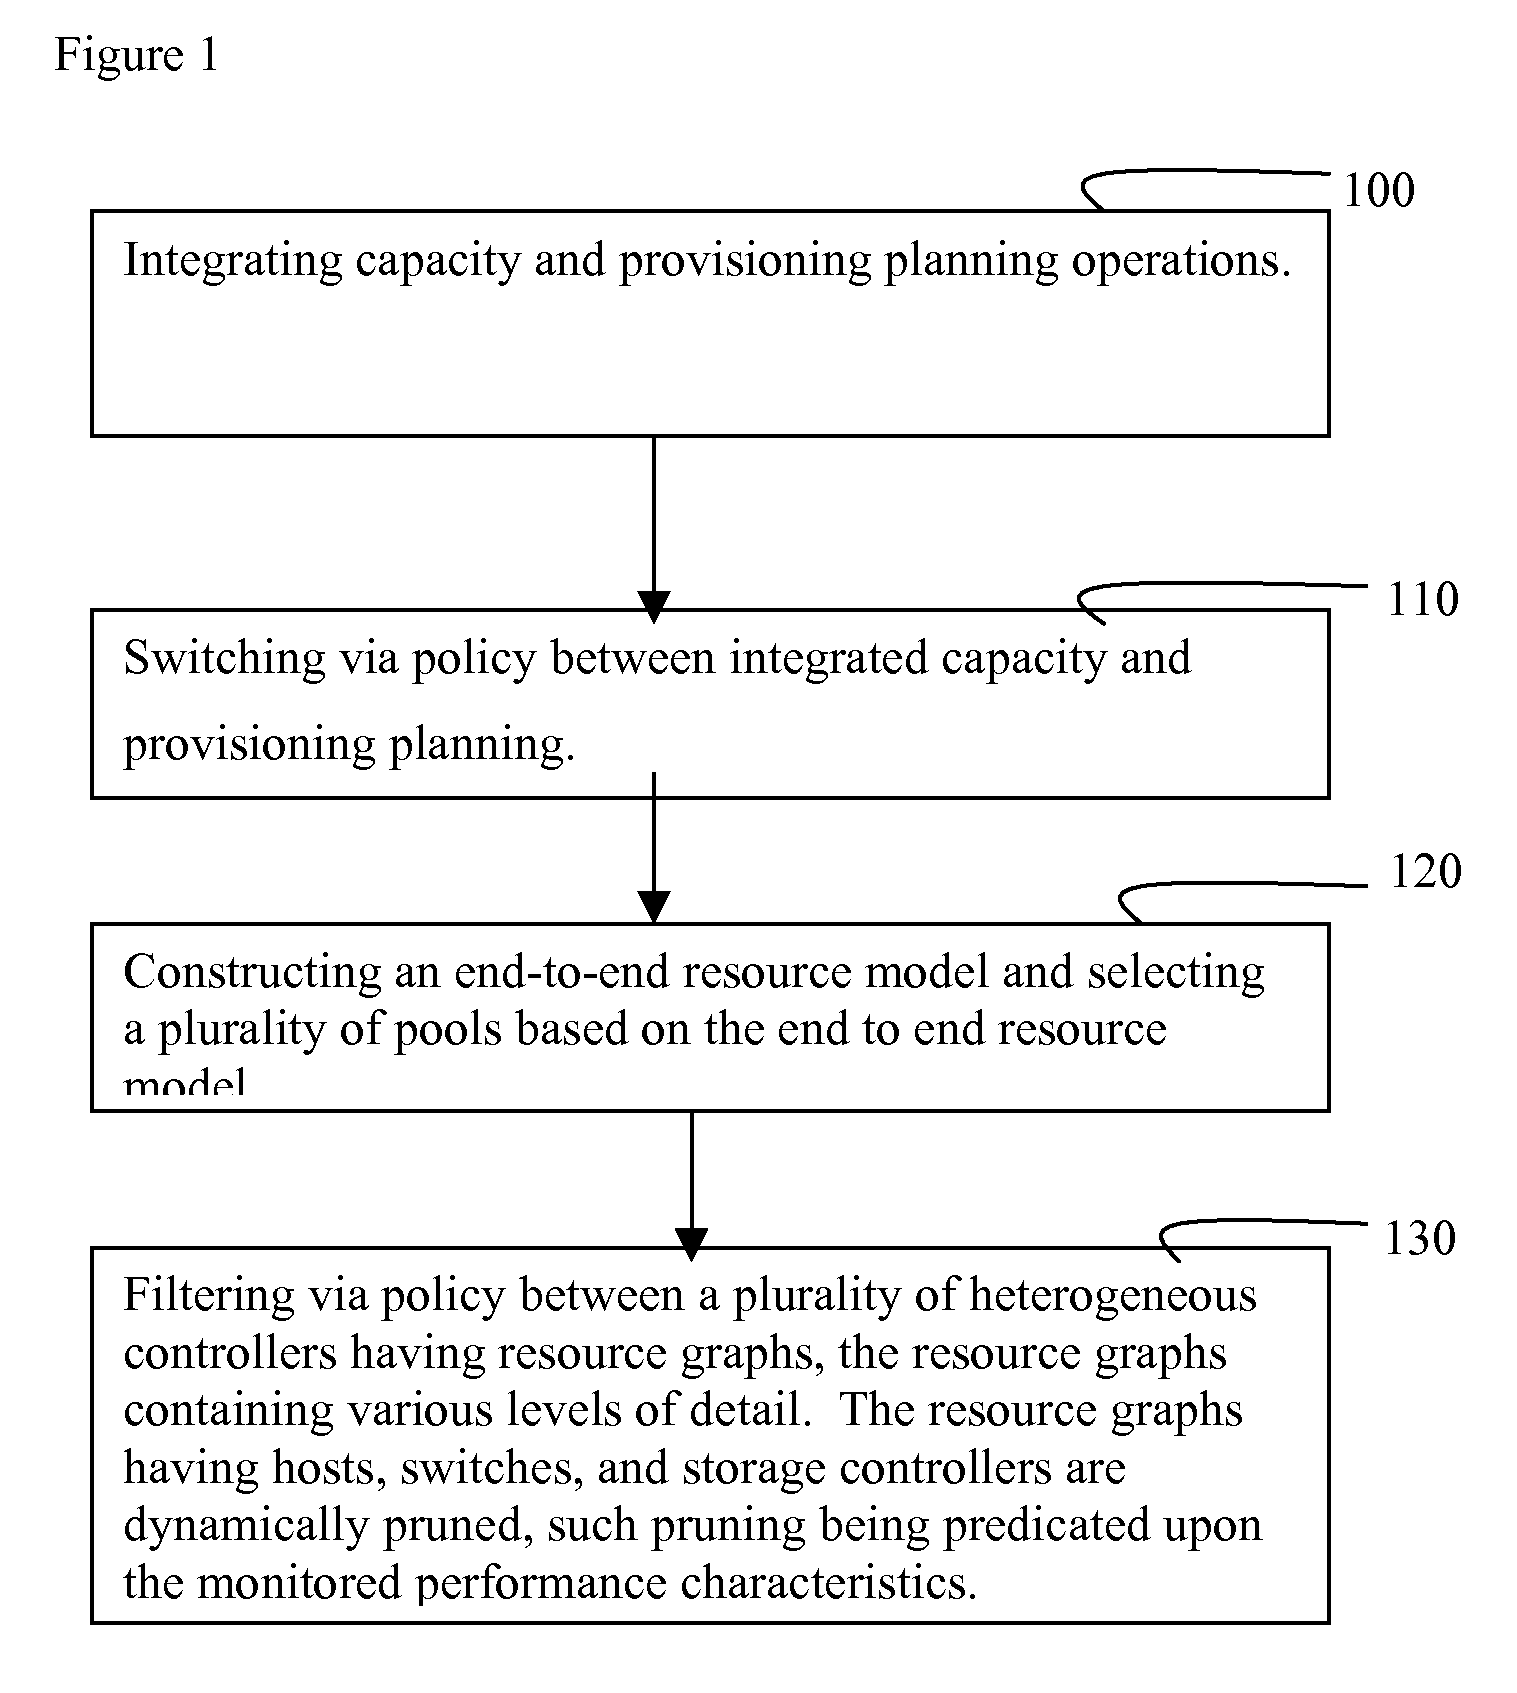 Method and implementation for storage provisioning planning